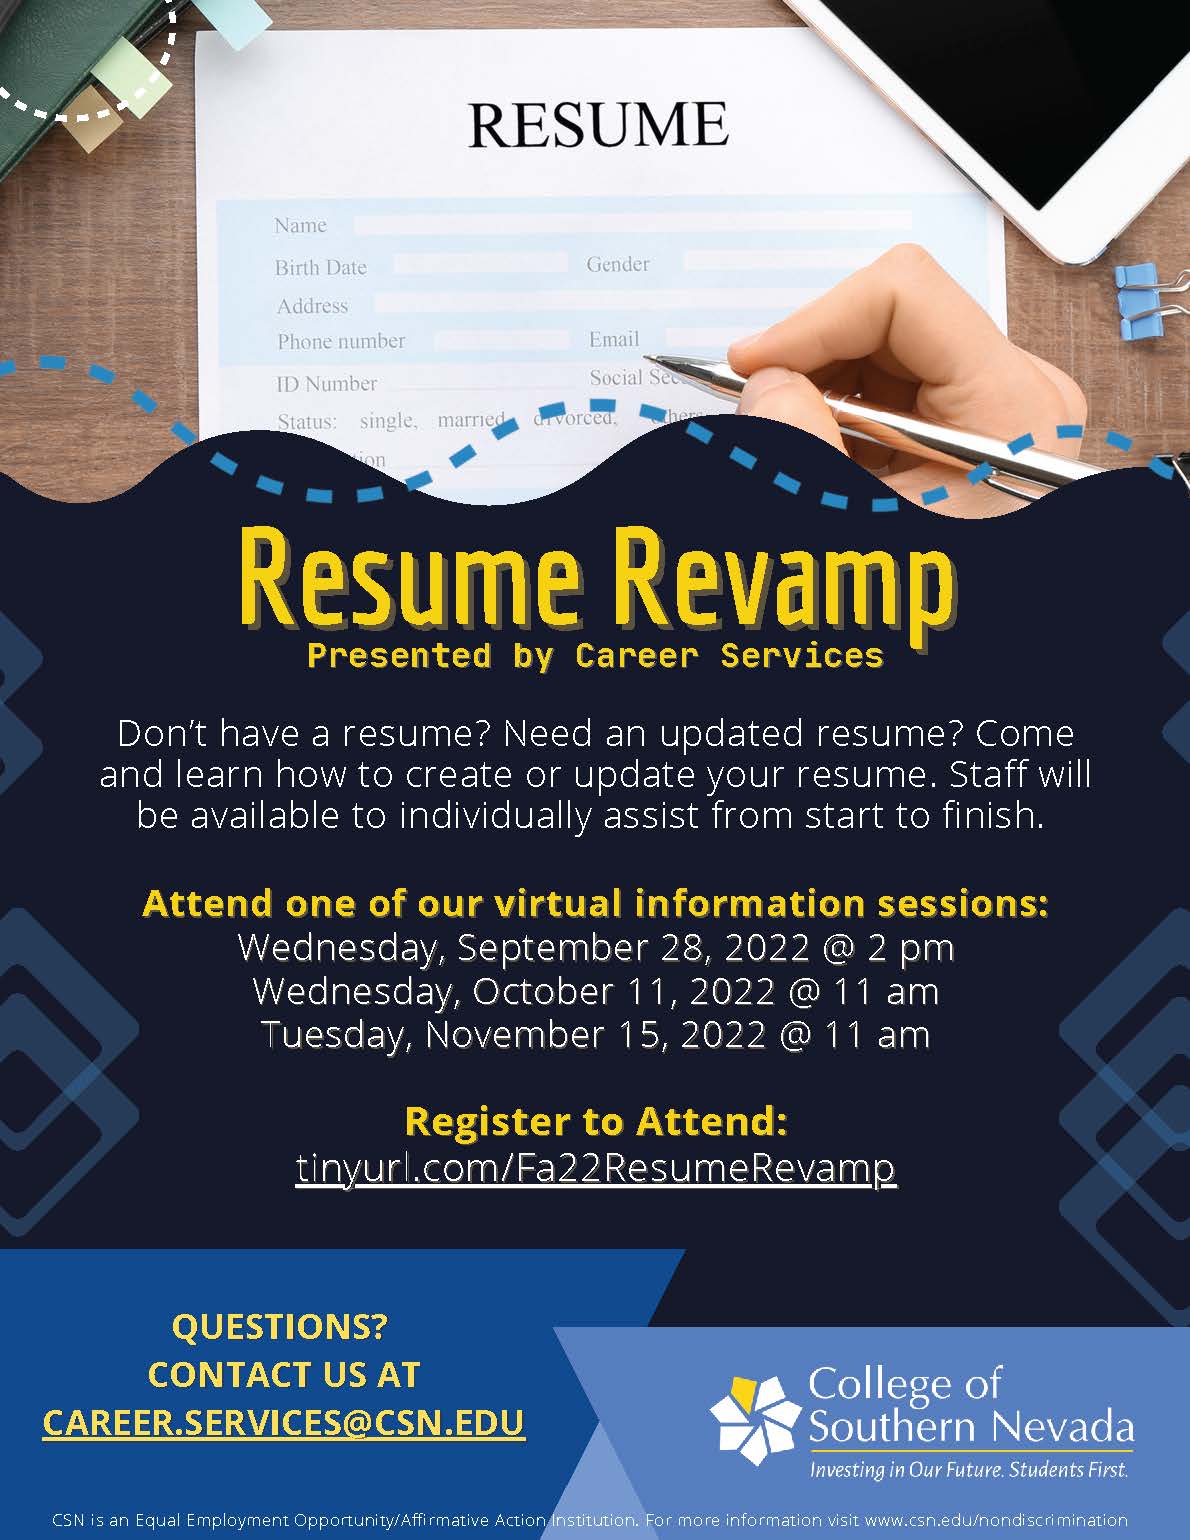 Come and learn how to create or update your resume.